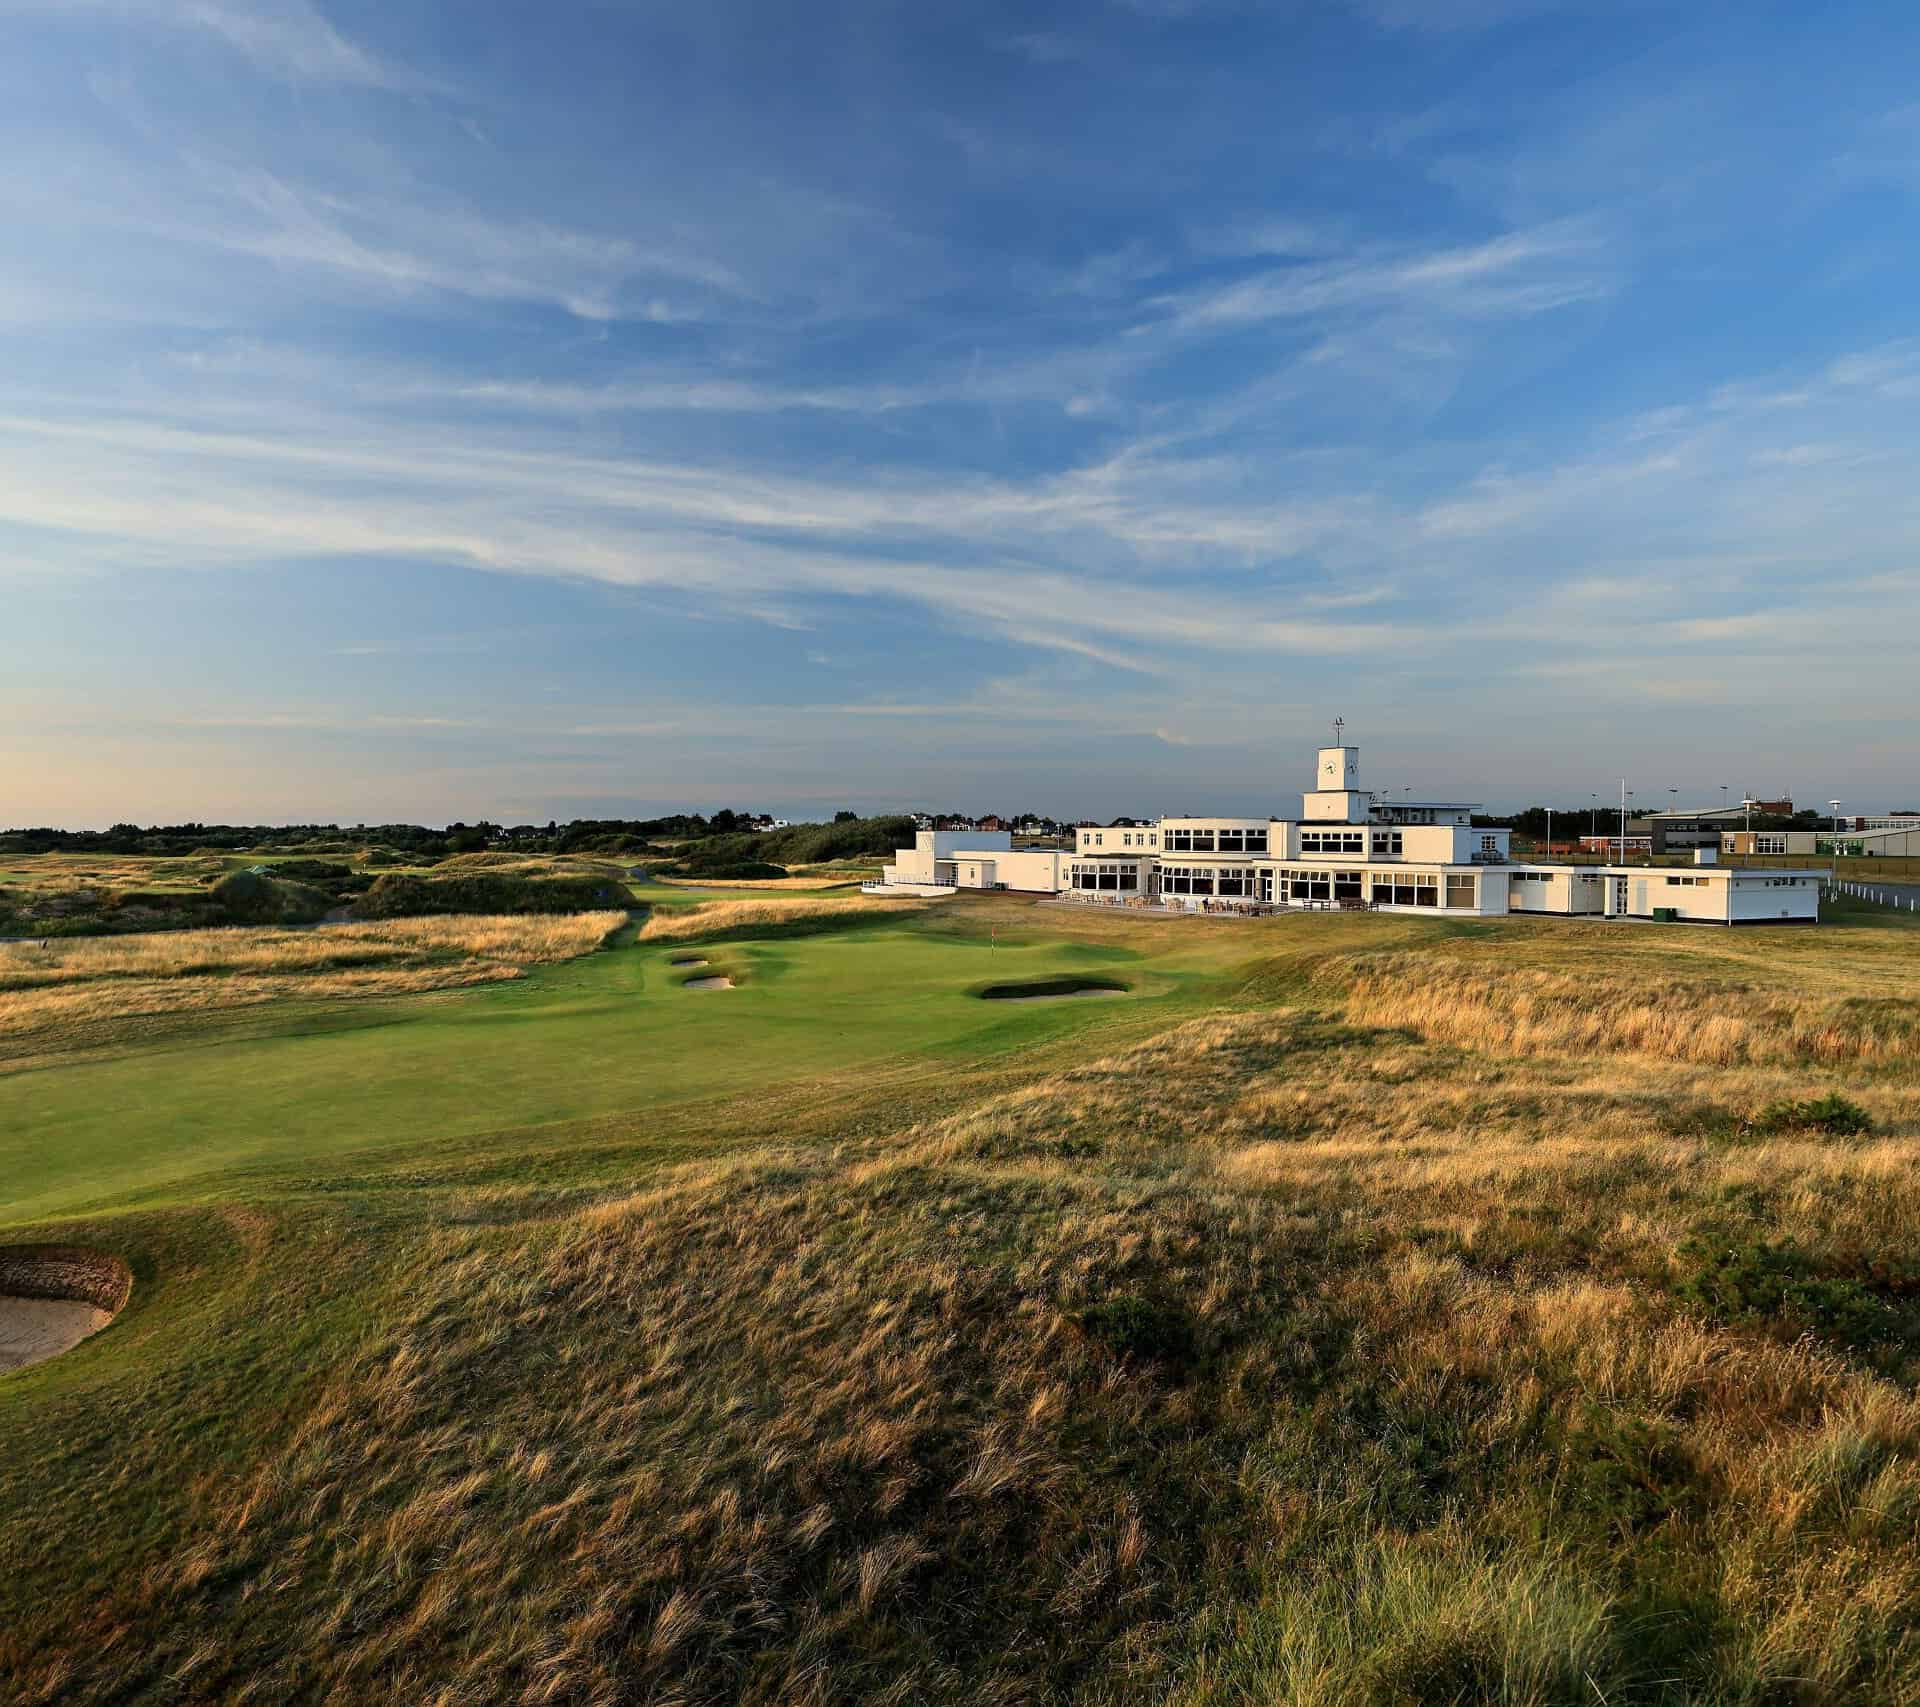 Royal Birkdale revamp: Should classic courses go under the knife?